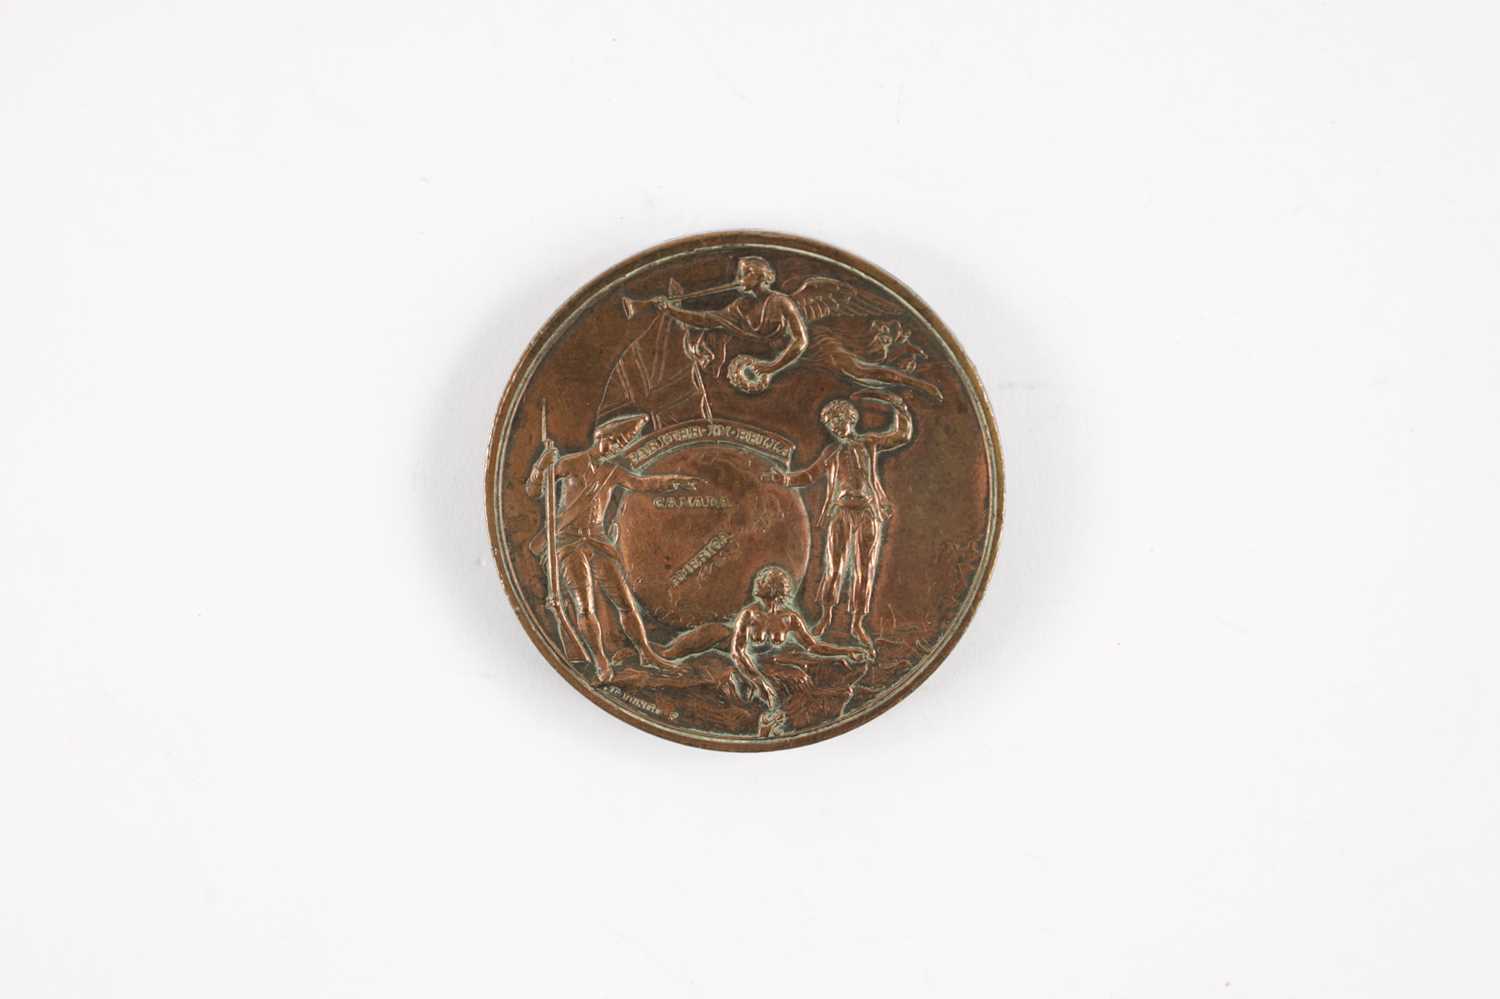 A RARE COPPER MEDAL COMMEMORATING THE CAPTURE OF LOUISBOURG IN 1758 - Image 2 of 3